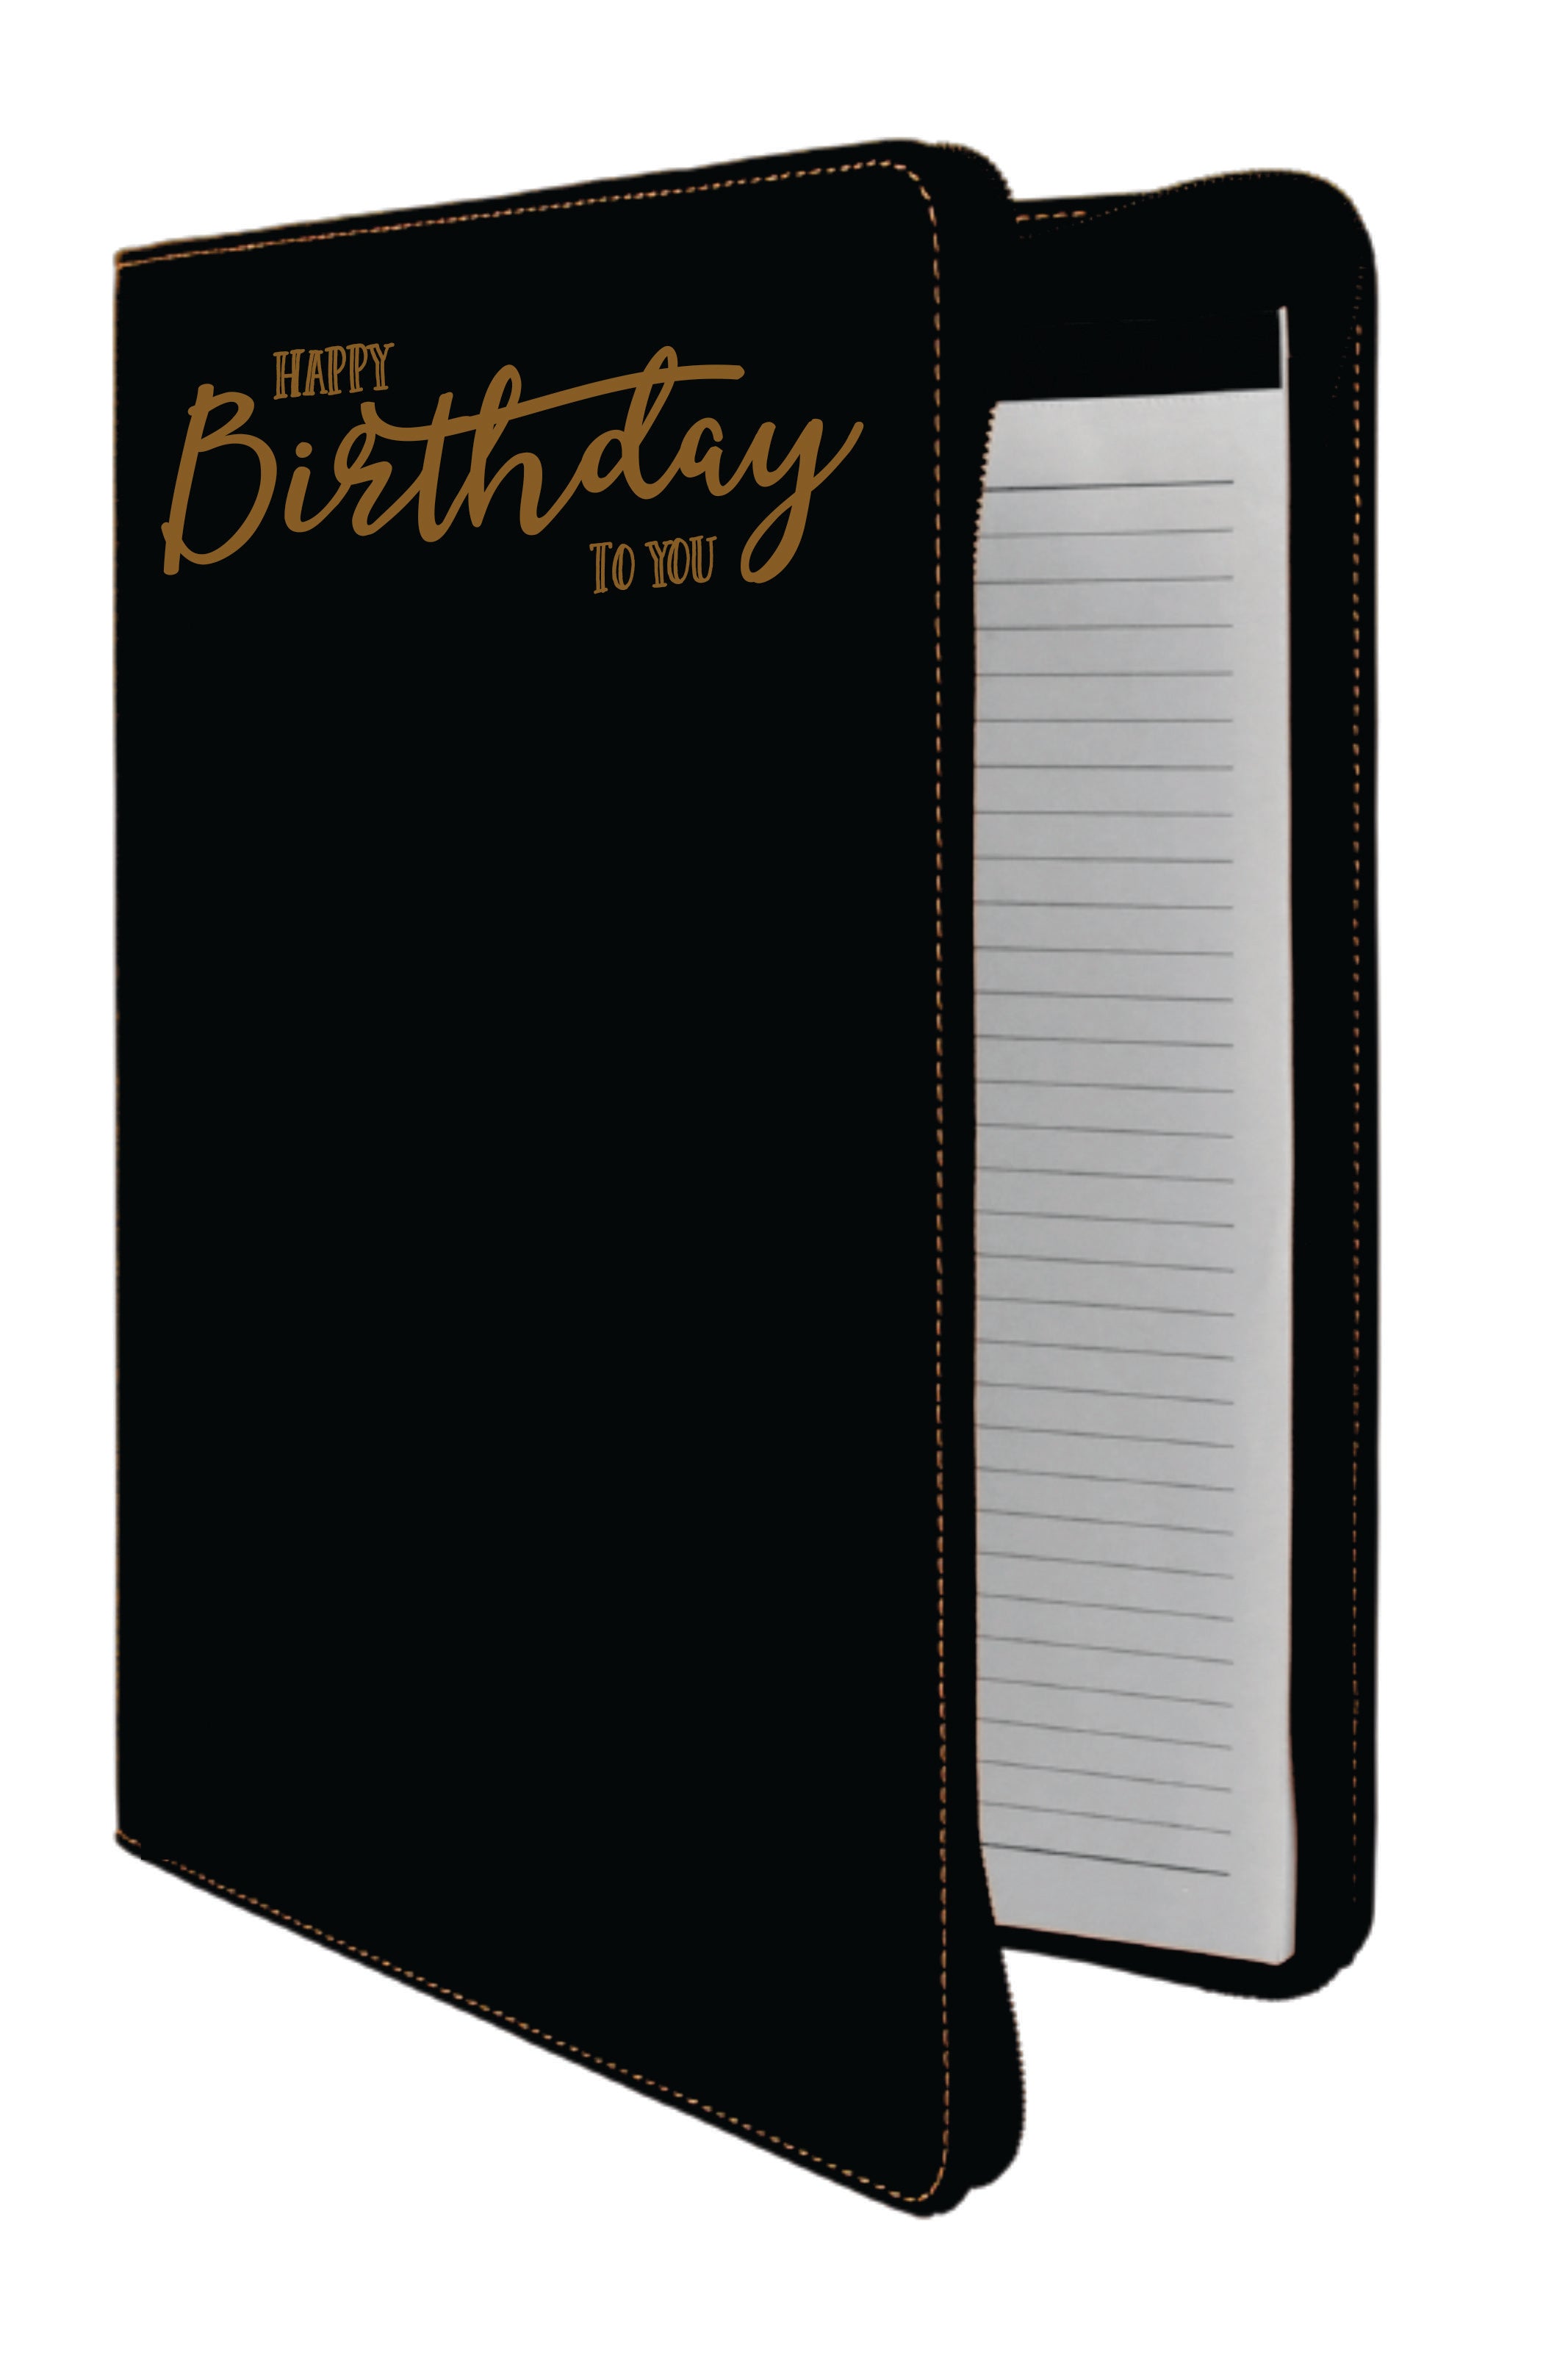 9 1/2" x 12" Black/Gold with Zipper Laserable Leatherette Portfolio with Notepad